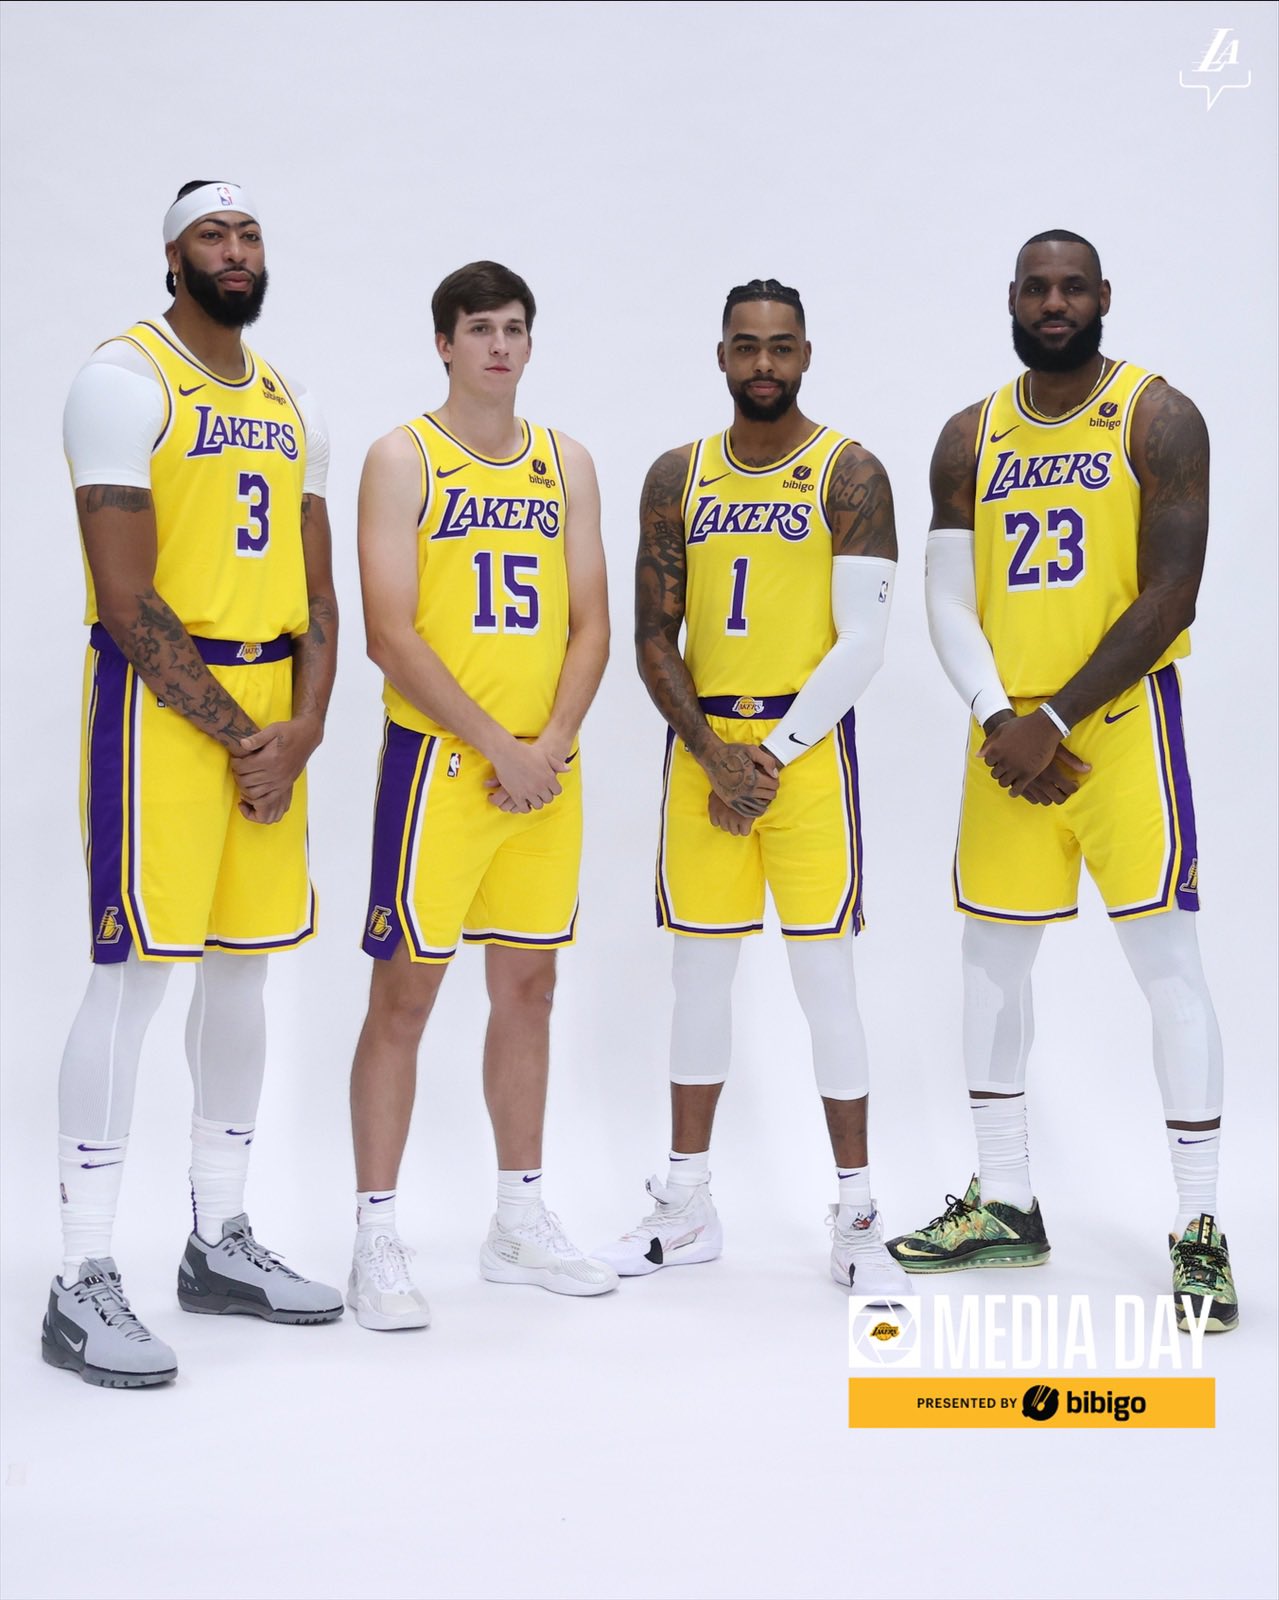 Los Angeles Lakers on X: A New Journey Begins #LakersMediaDay